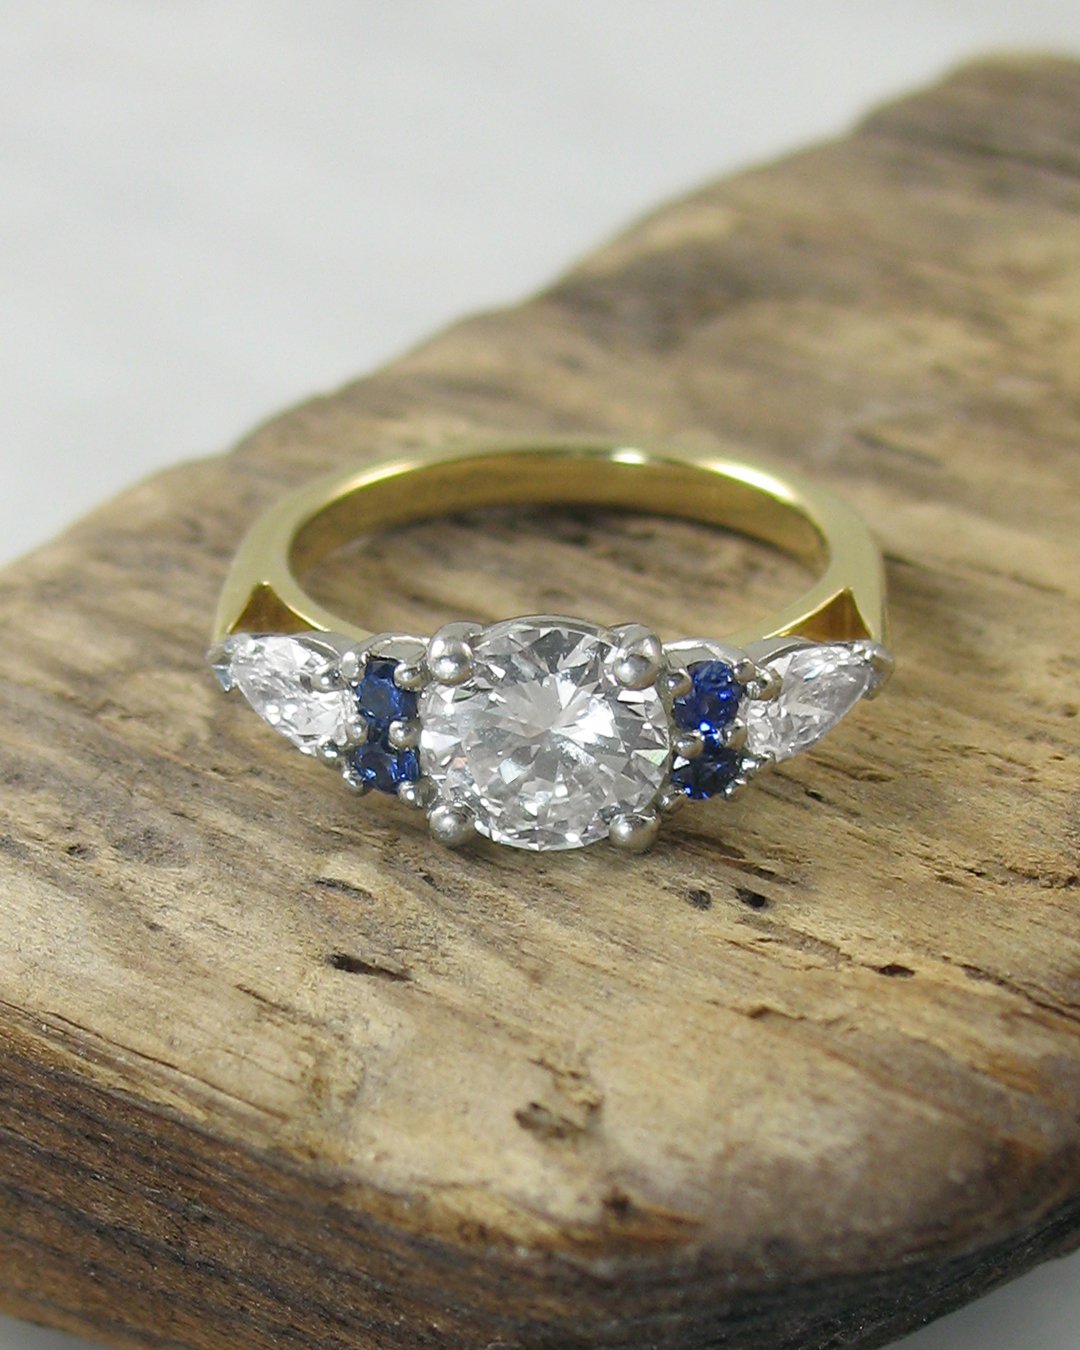 A traditional diamond and sapphire engagement ring